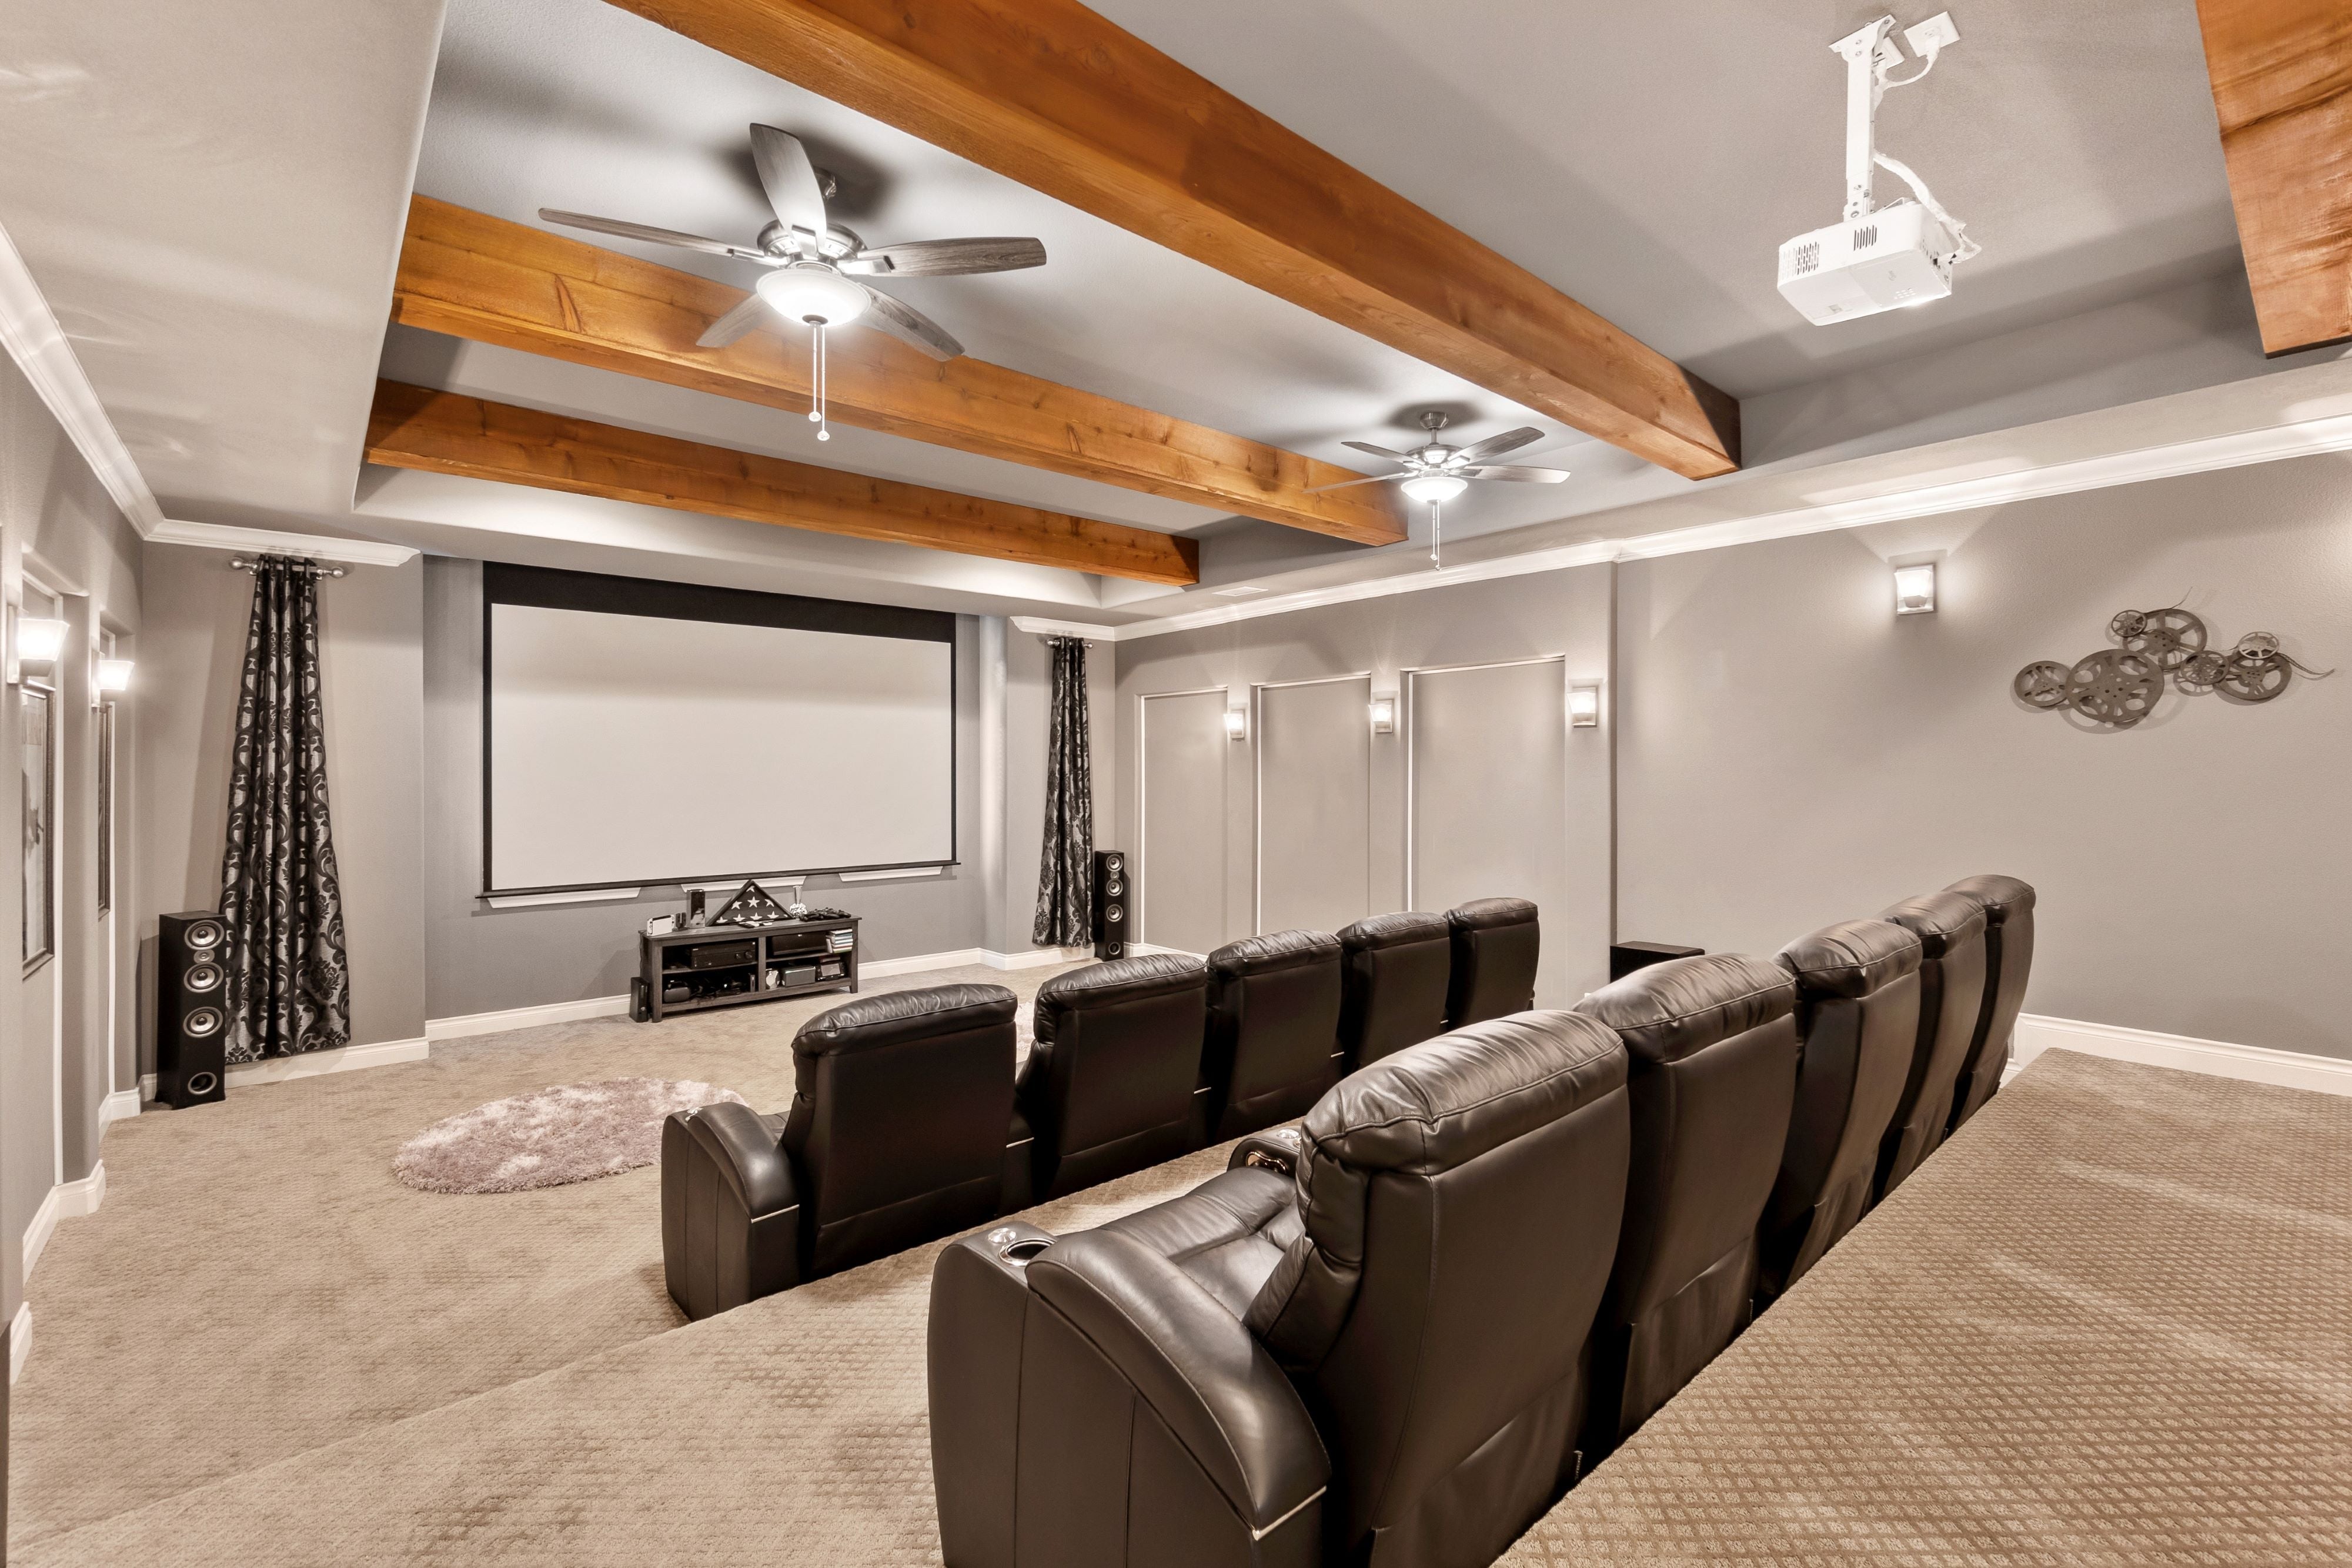 21 Incredible Home Theater Design Ideas & Decor (Pictures)  Home cinema  room, Home theater room design, Home theater rooms